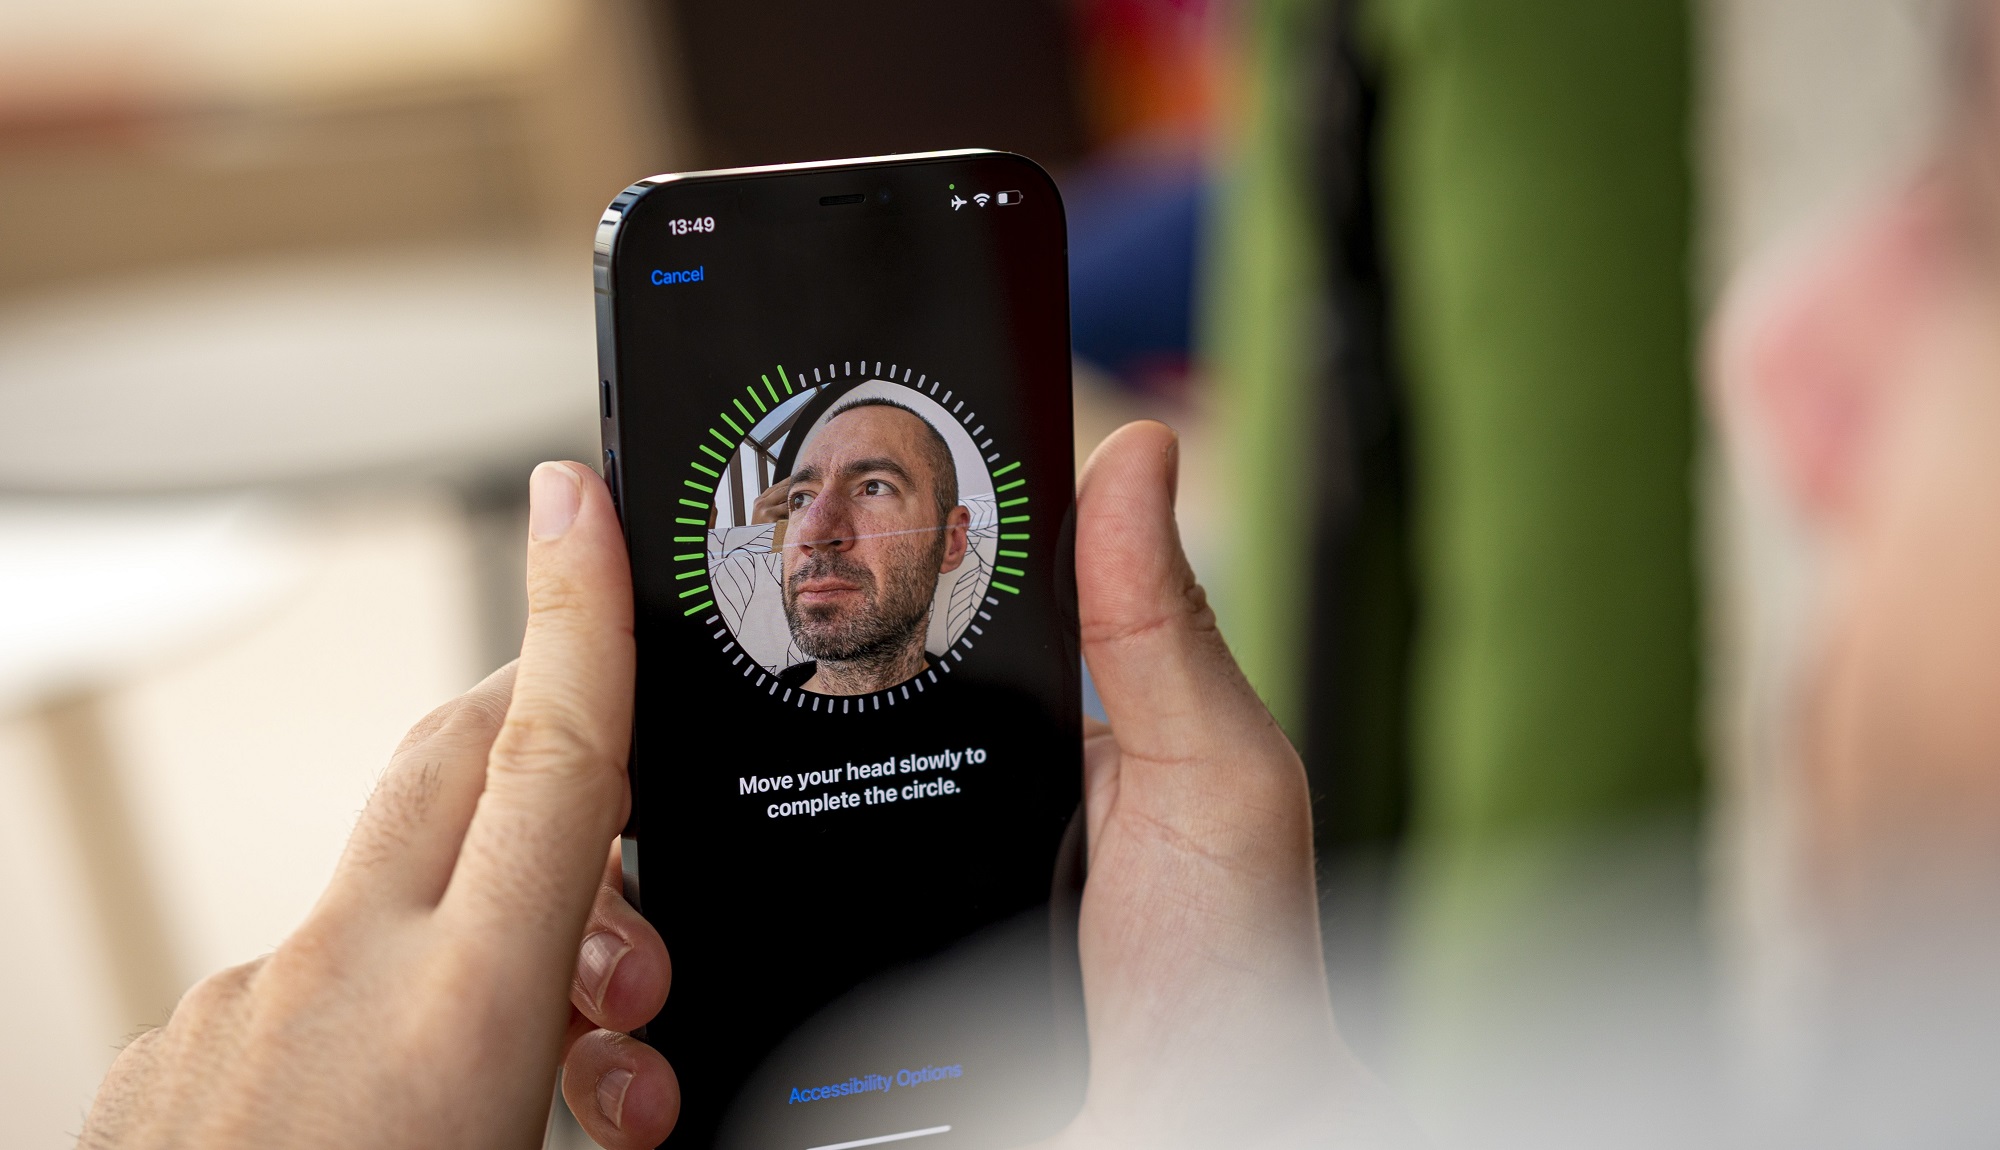 Ios 145 Lets You Unlock Your Iphone With Face Id While Wearing A Mask If You Have An Apple